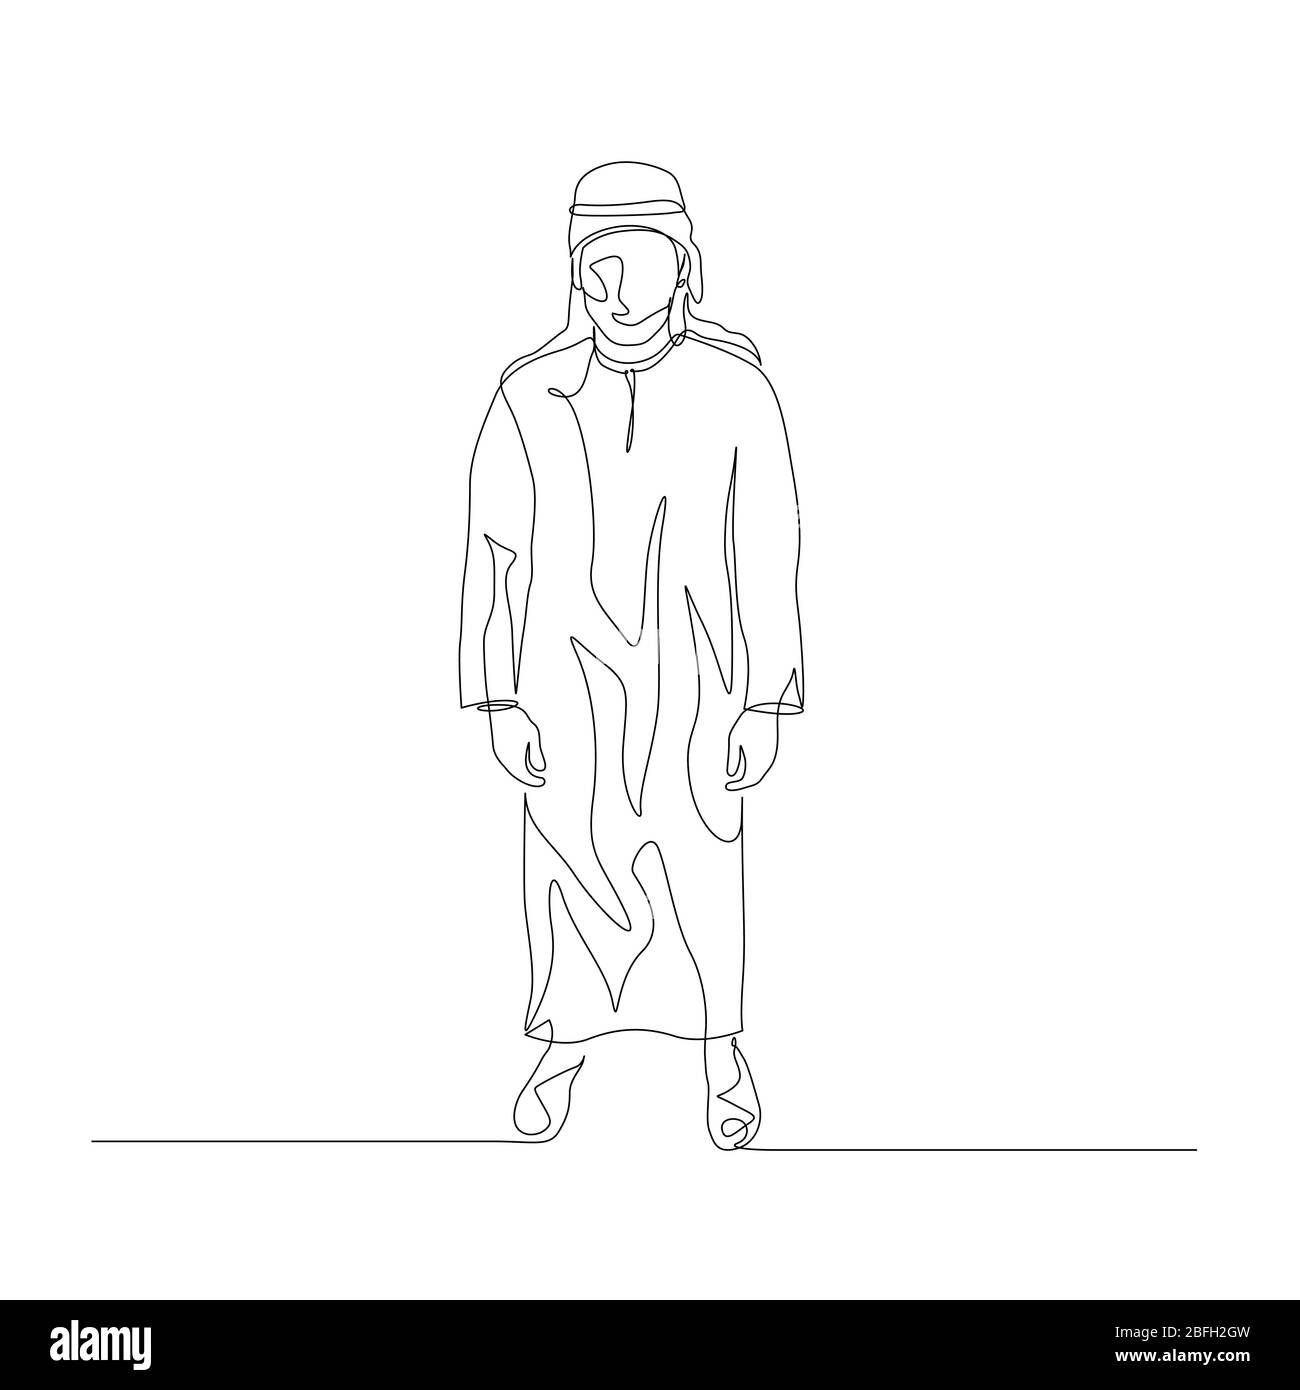 https://c8.alamy.com/comp/2BFH2GW/continuous-one-line-man-in-arabic-clothing-vector-illustration-2BFH2GW.jpg